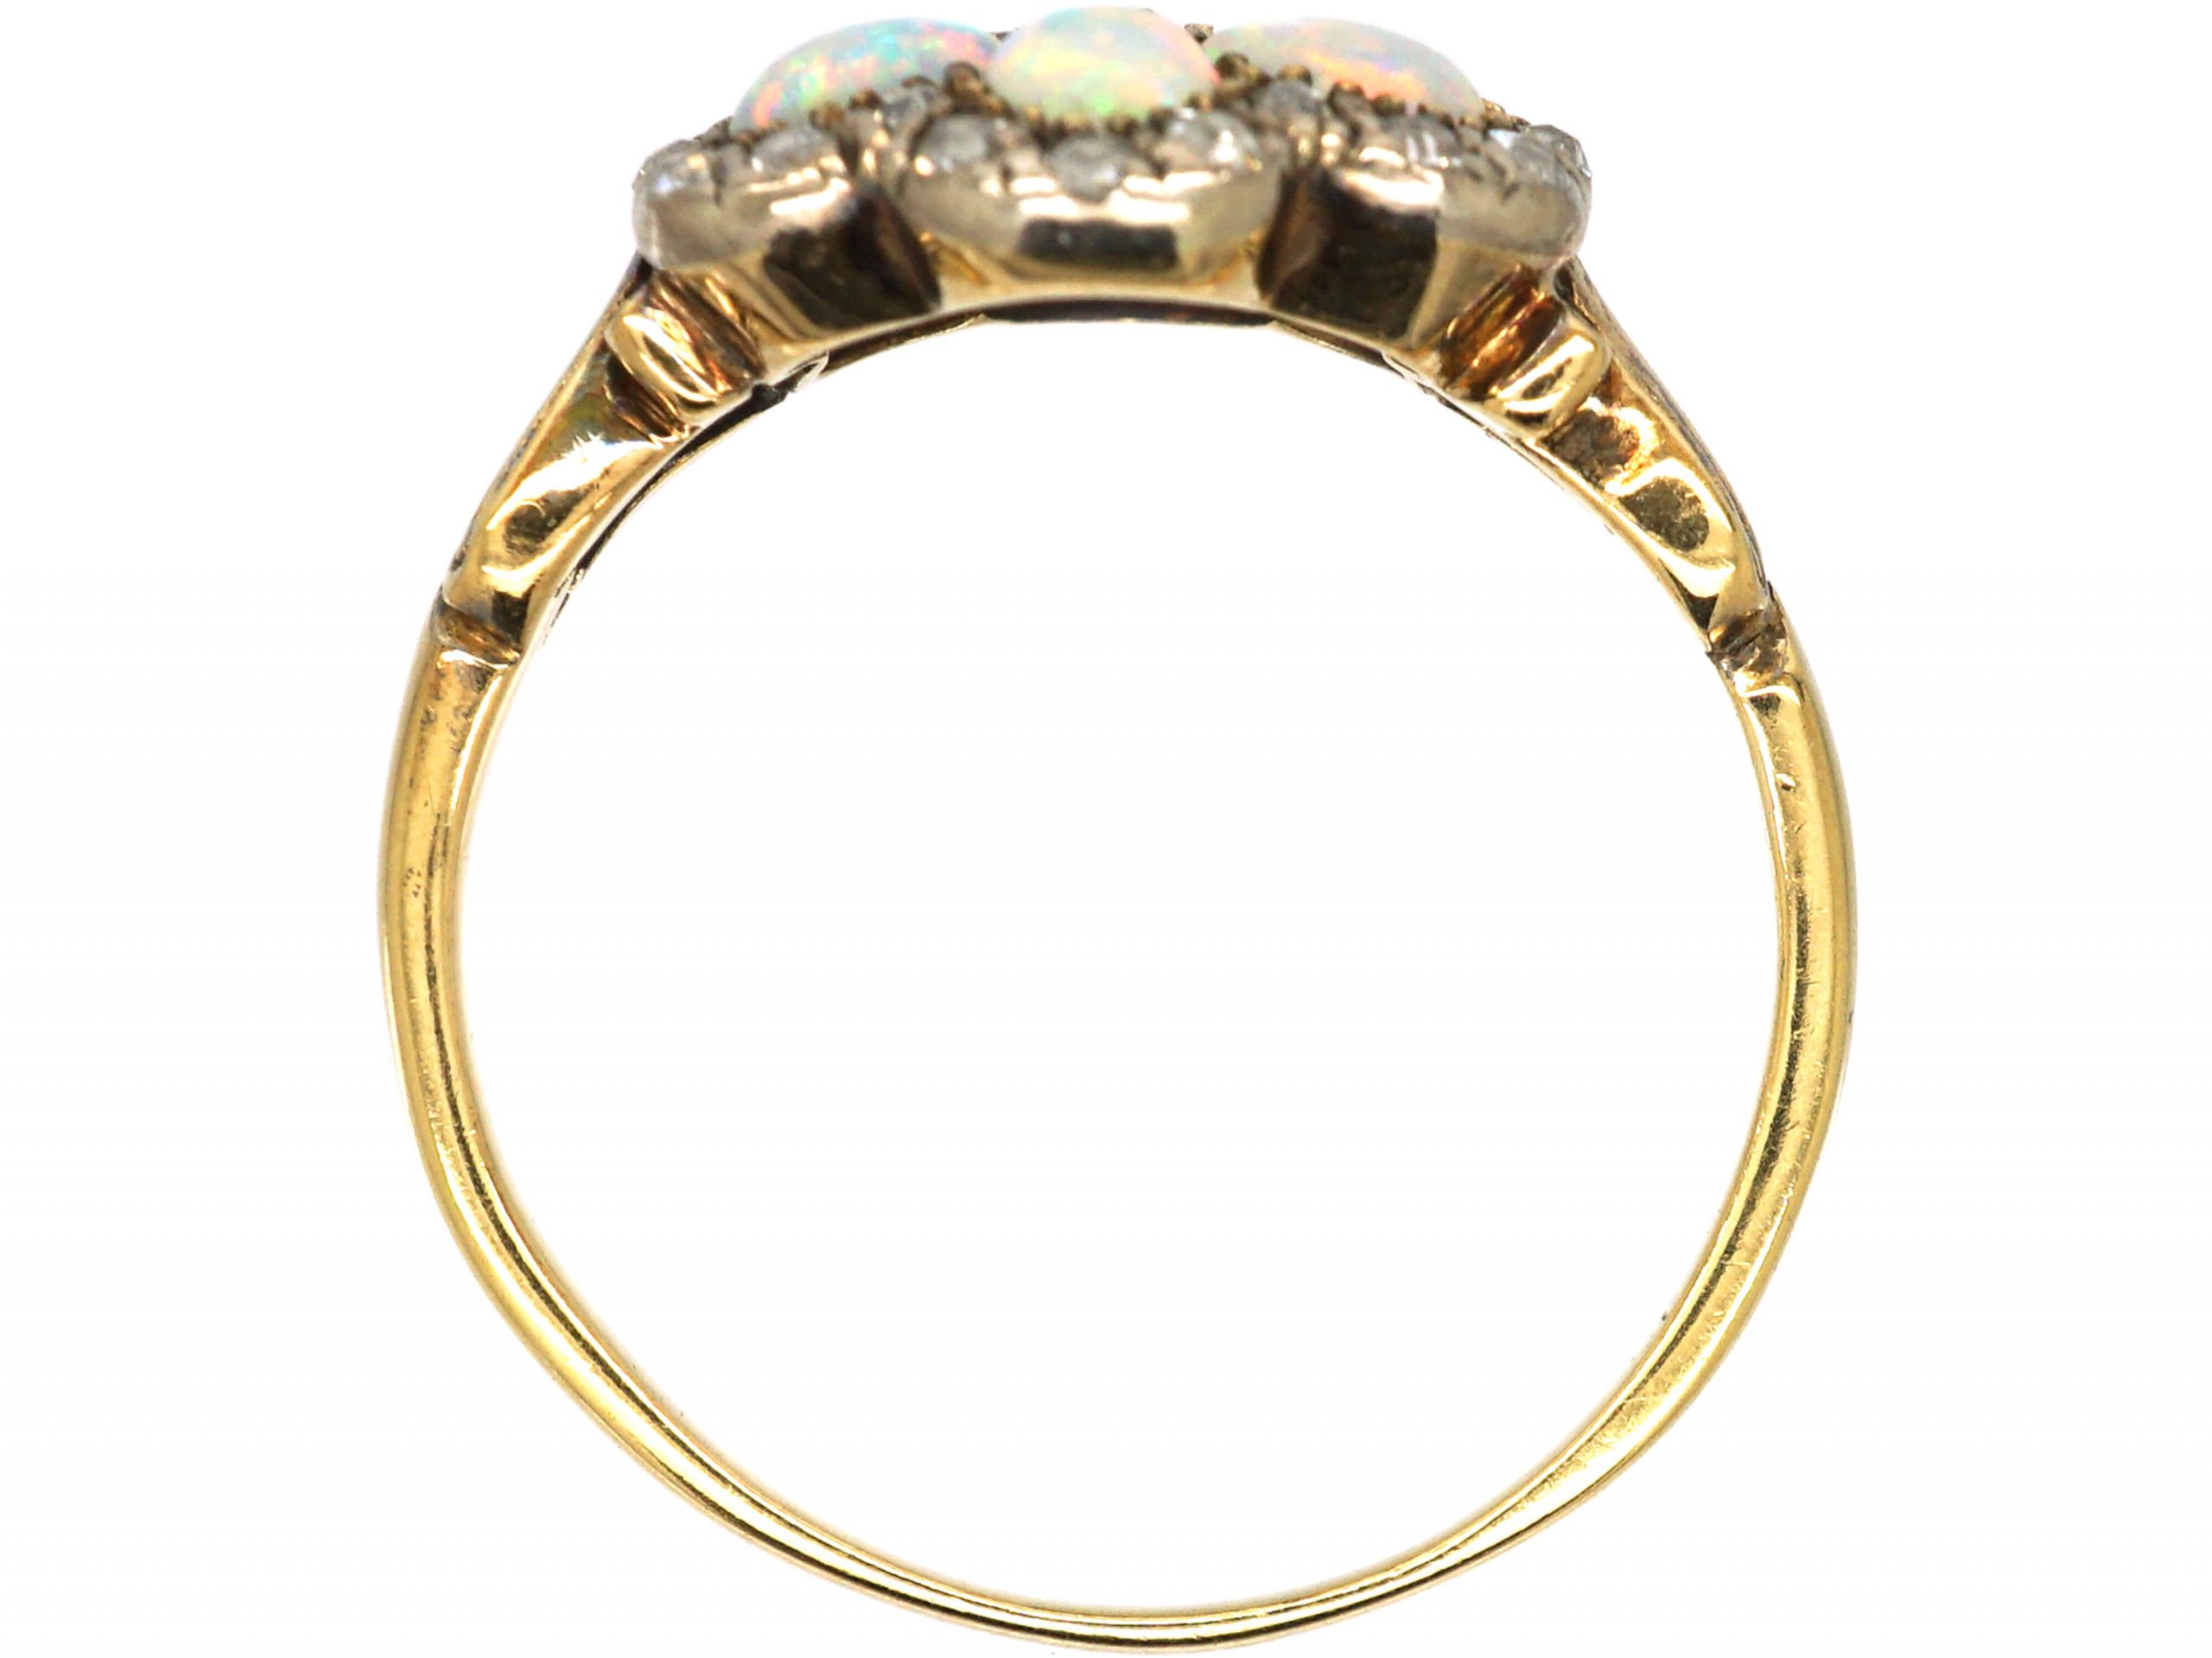 Edwardian 18ct Gold, Opal & Diamond Cluster Ring (338W) | The Antique ...